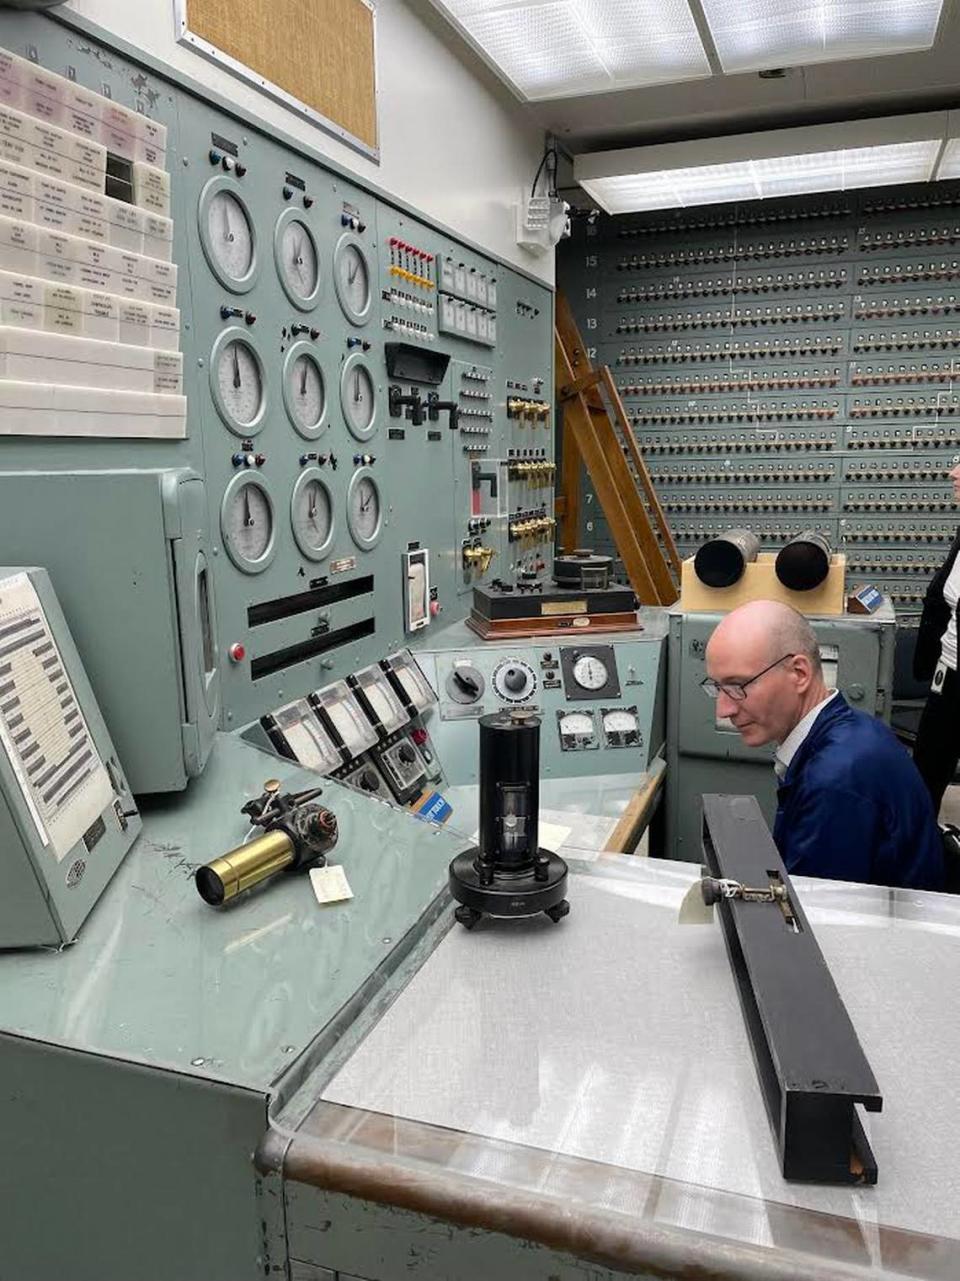 David Turk, deputy secretary of energy, visited Hanford’s B Reactor before Cleanup to Clean Energy Information Day in Richland to discuss leasing 19,000 acres of Hanford land for clean energy projects.